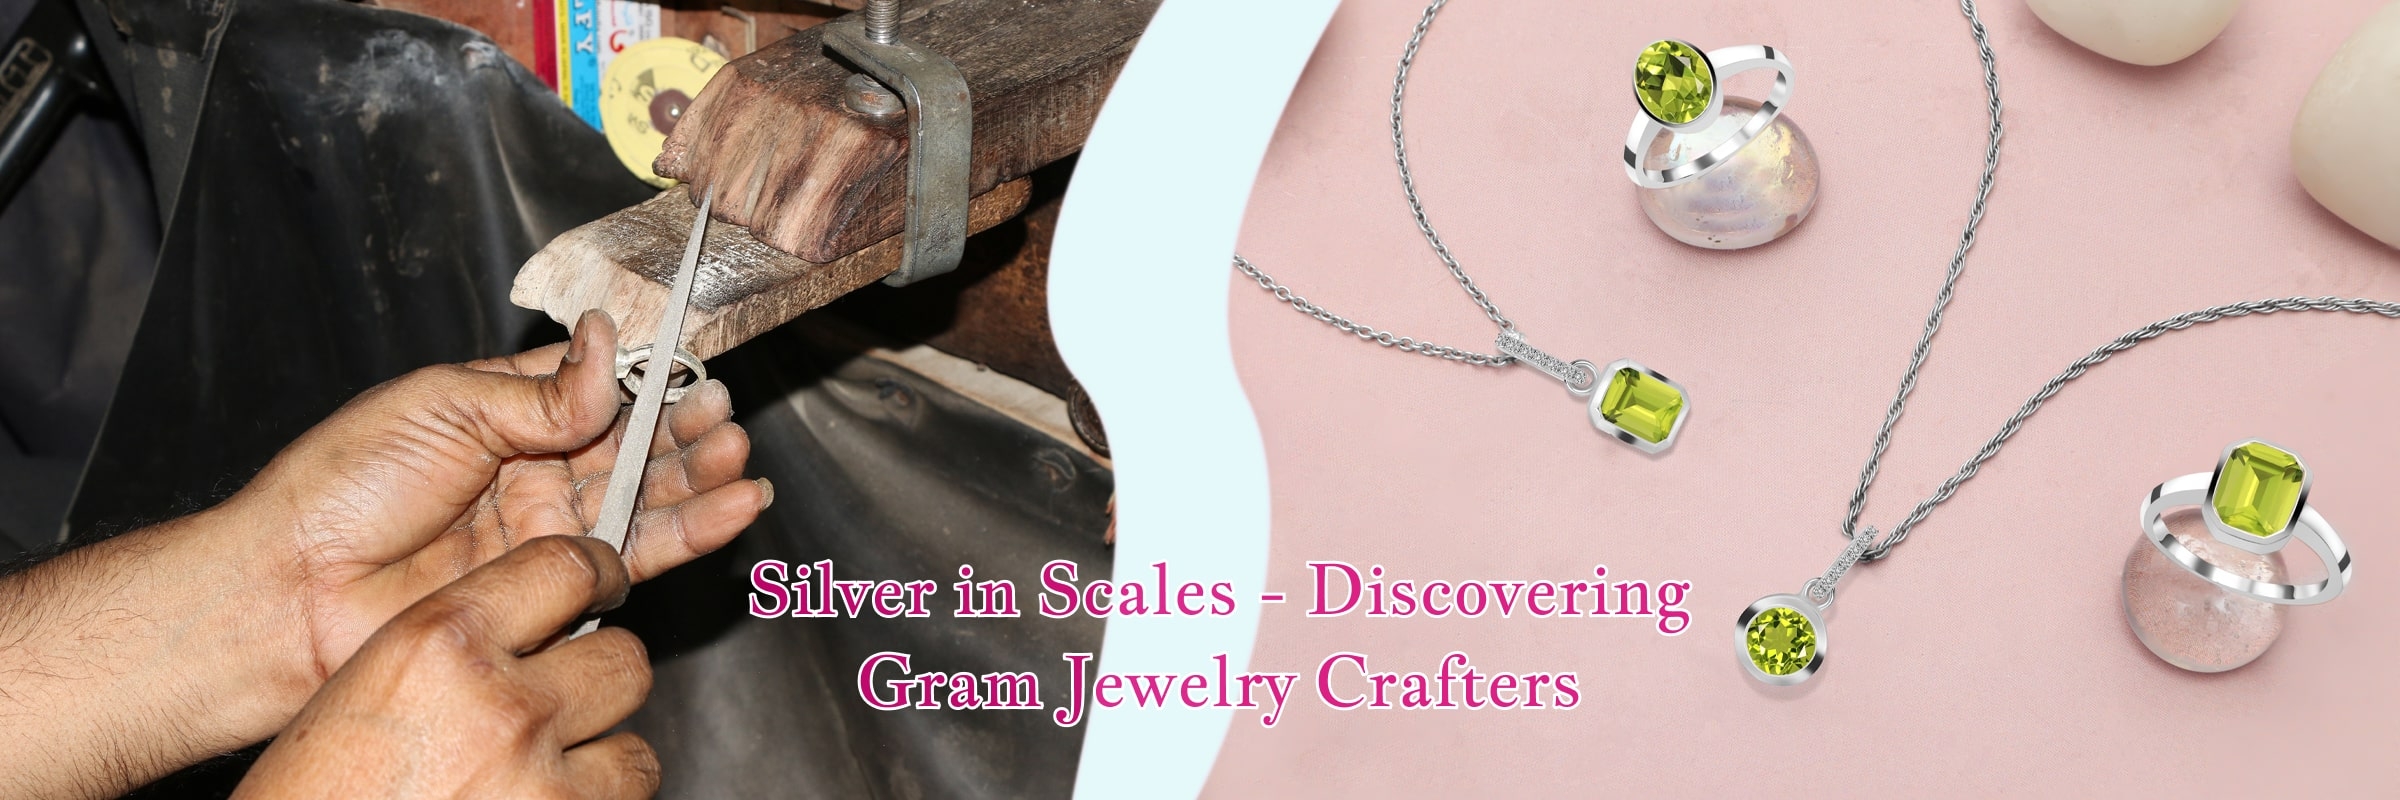 Finding Manufacturers Who Sell Silver Jewelry in Gram